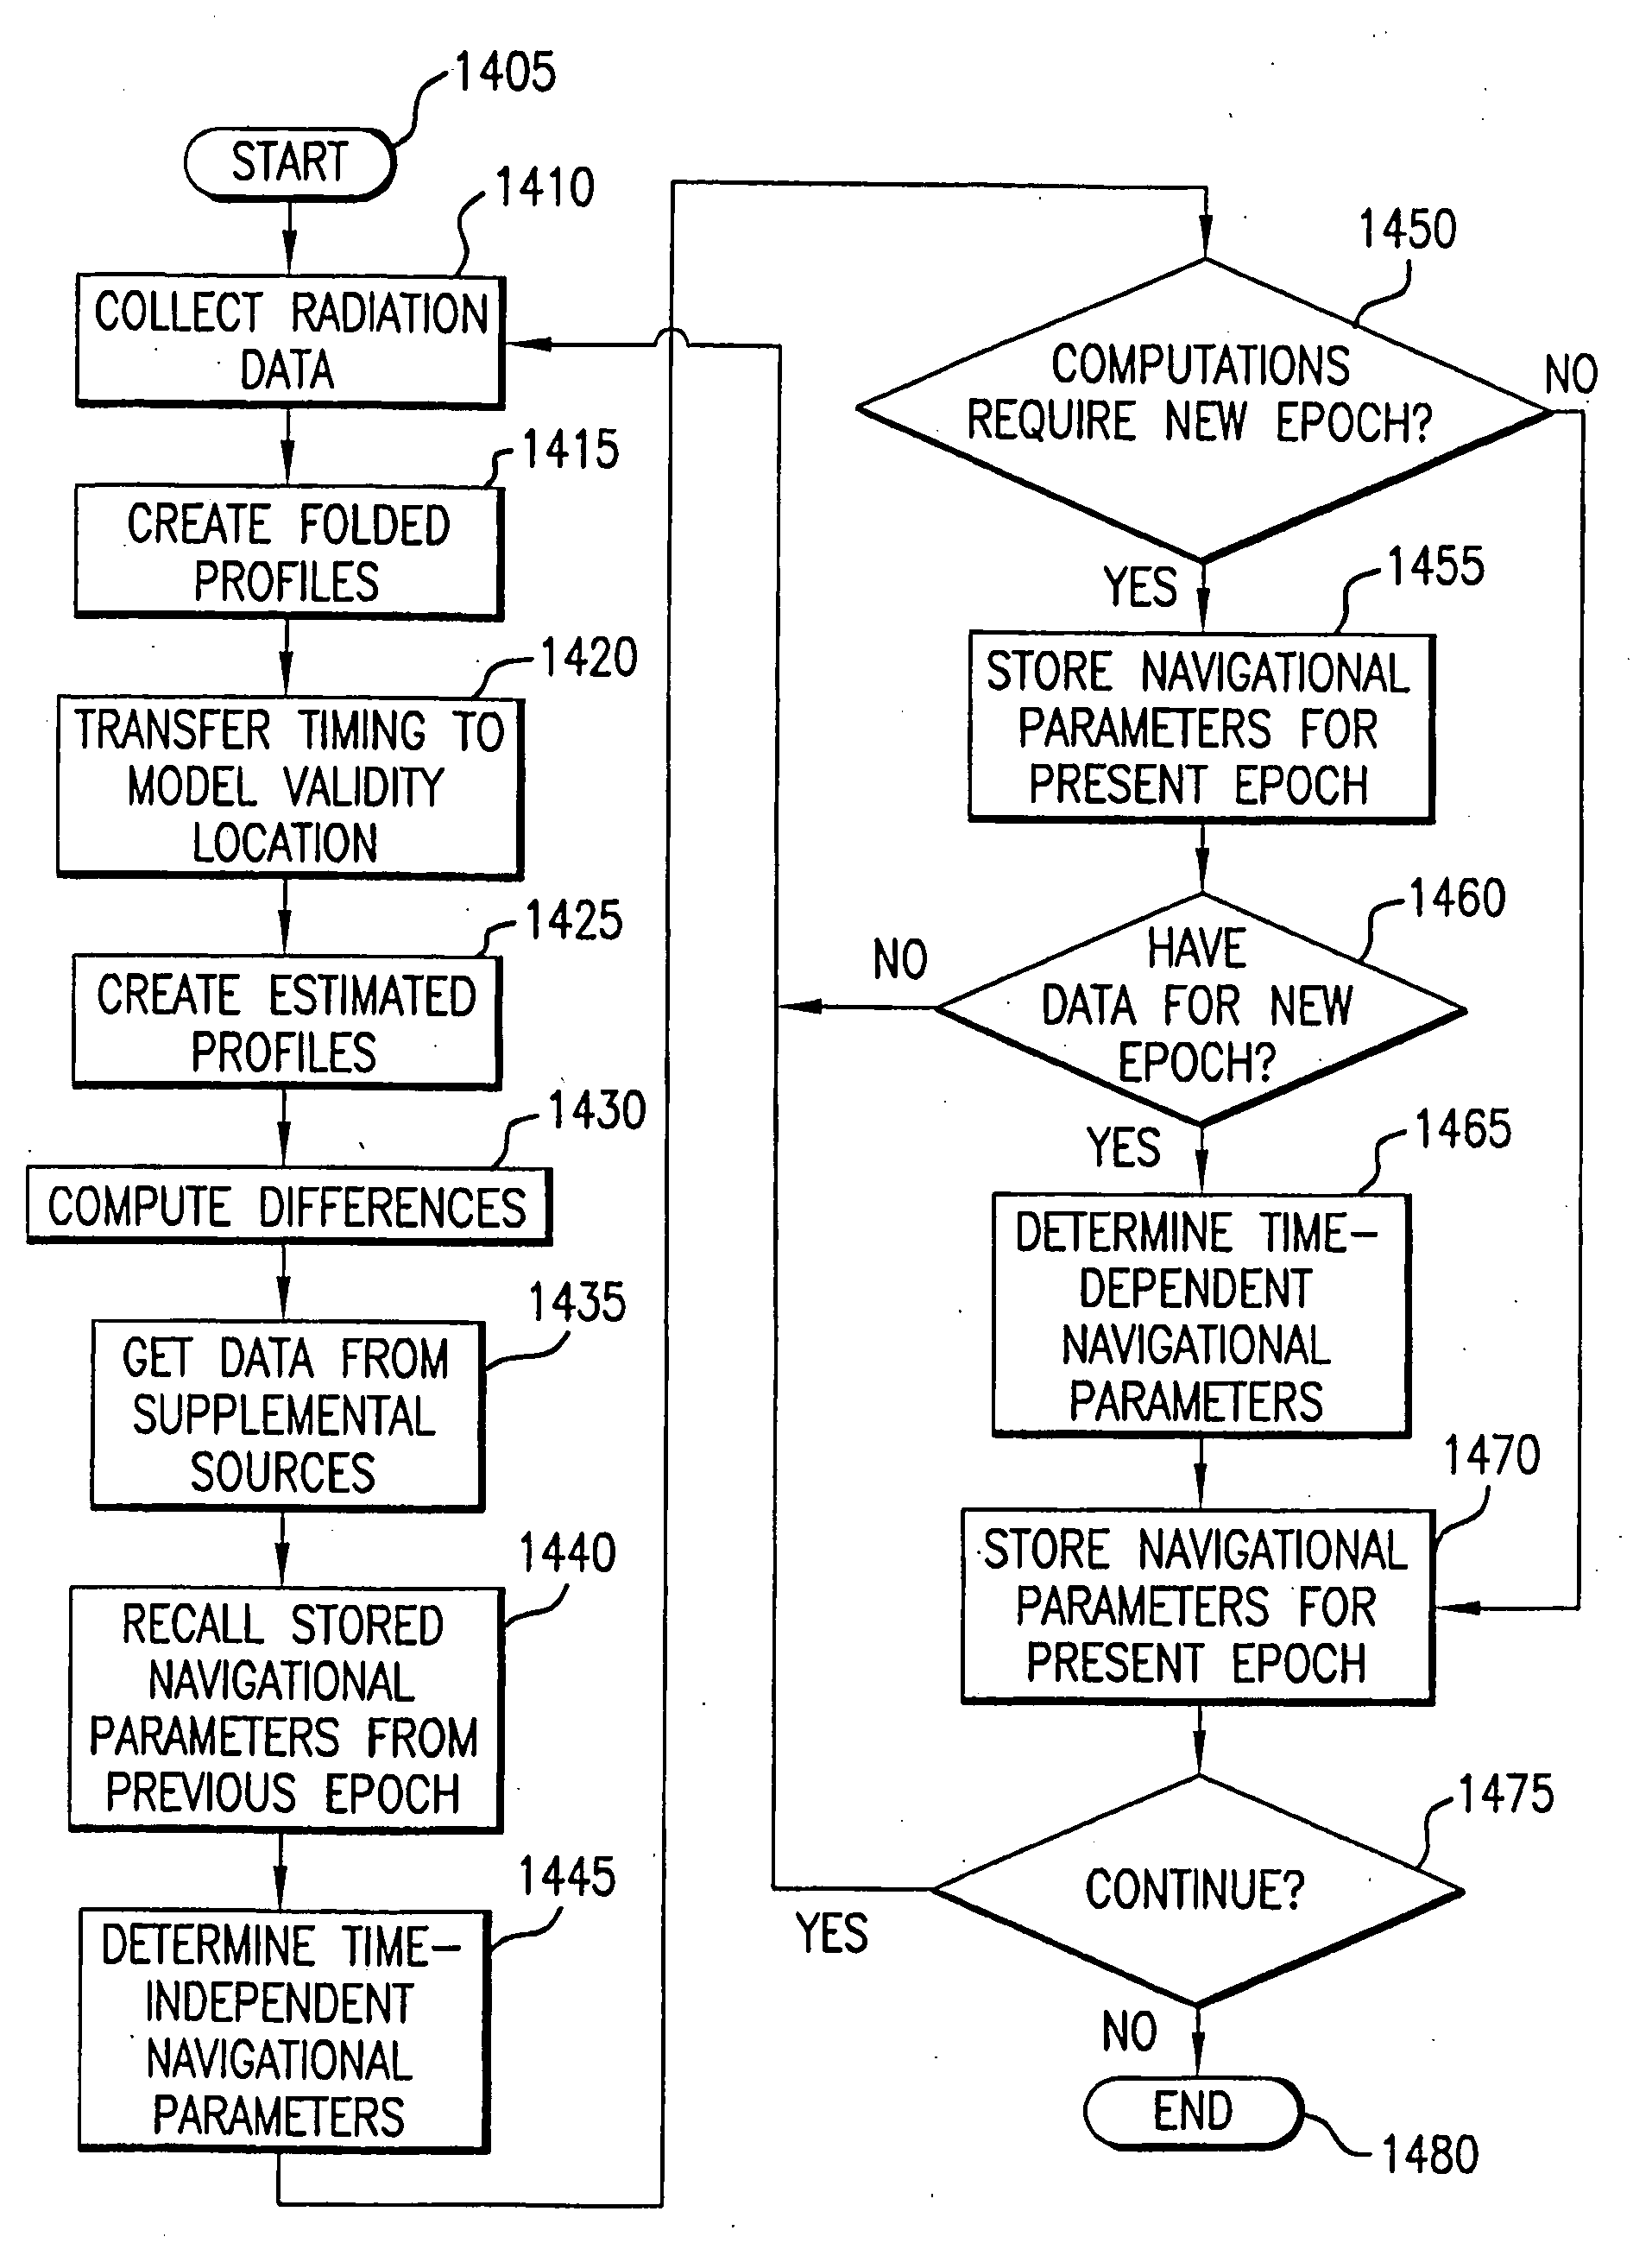 Navigation system and method using modulated celestial radiation sources